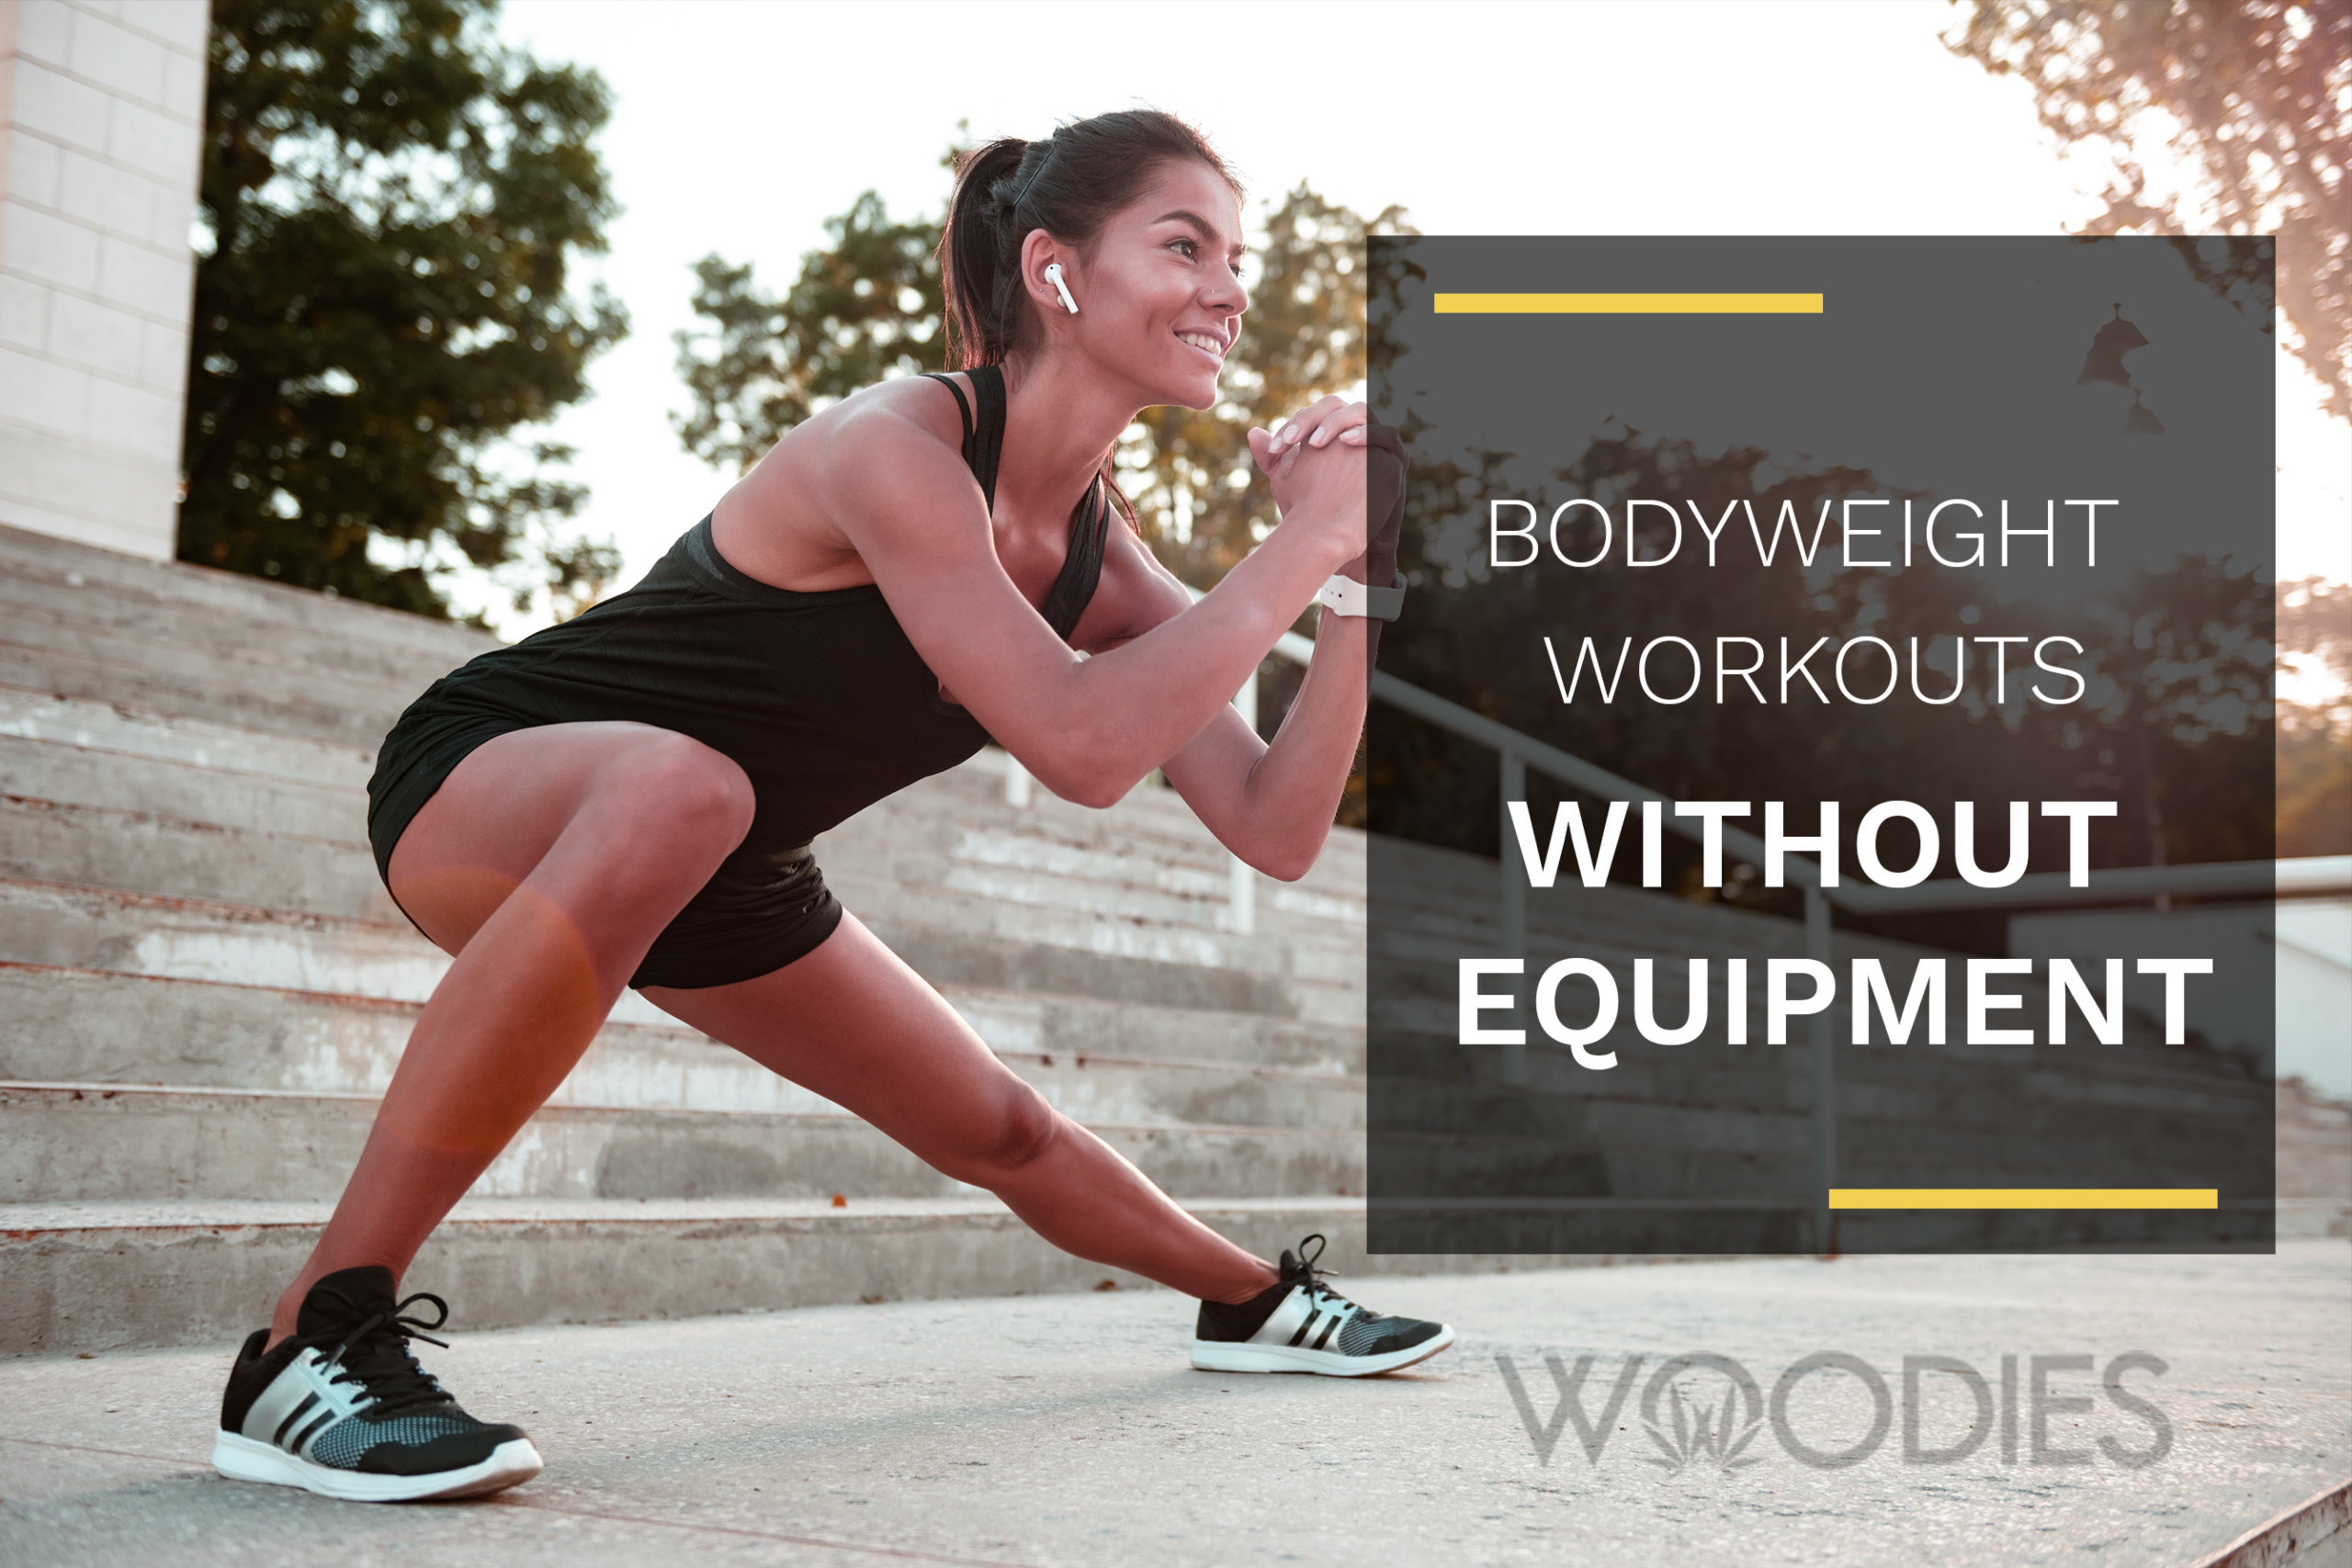 Bodyweight Workouts Without Equipment